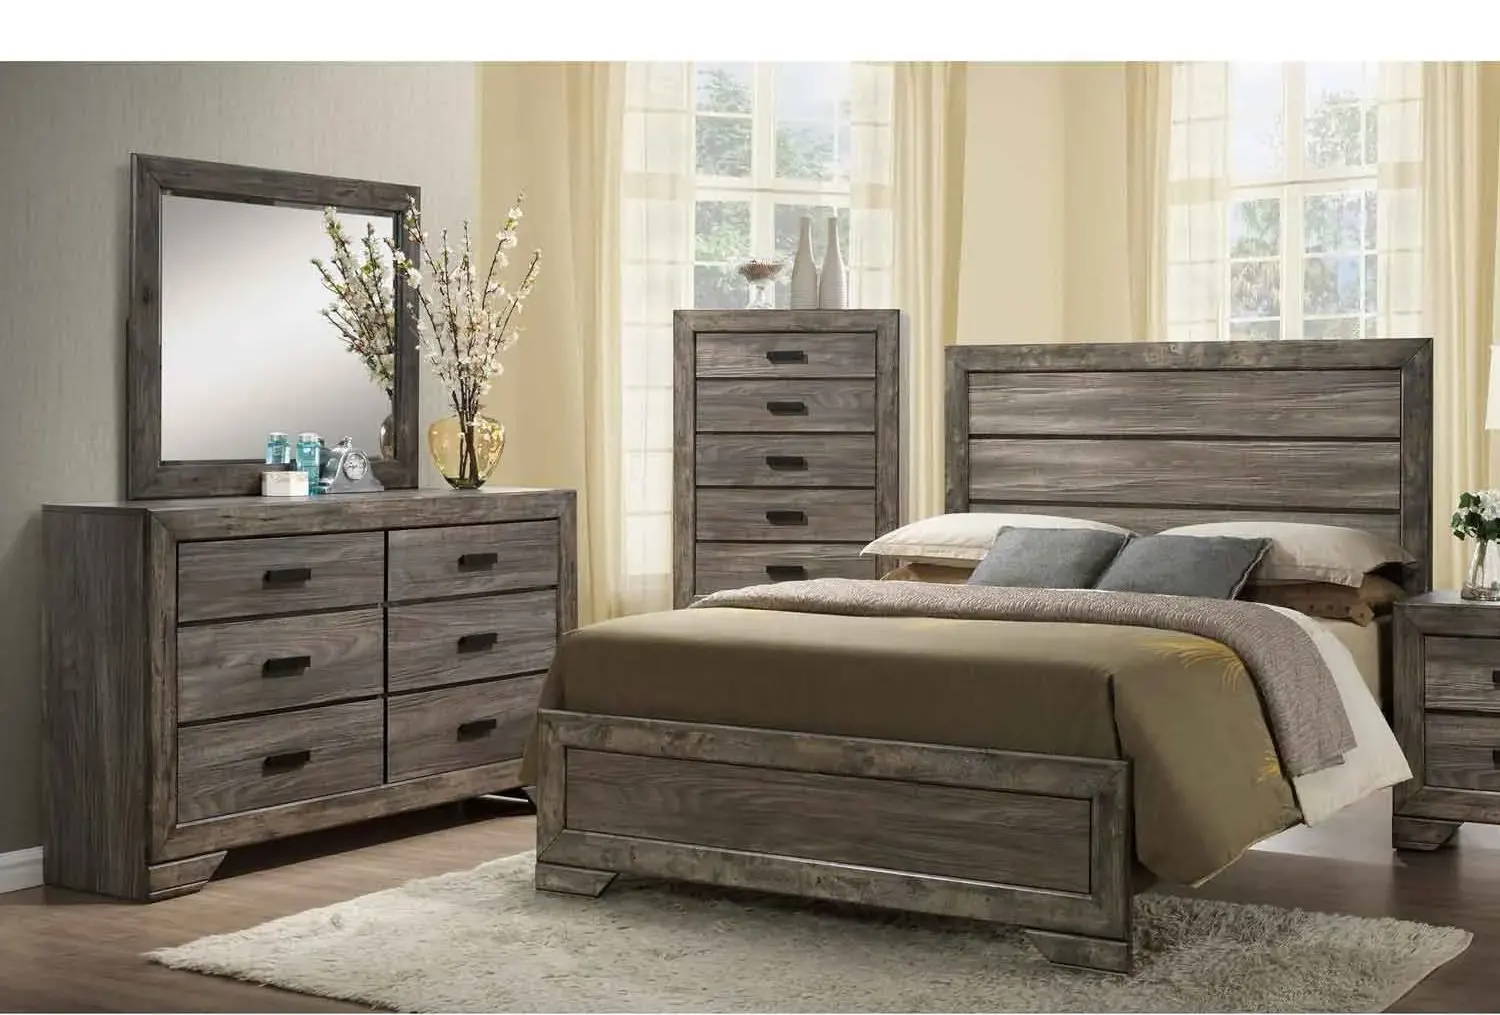 Ranking Bedroom Set Quality From Good, Better, & Best (Bedroom Collection Reviews & Ratings)